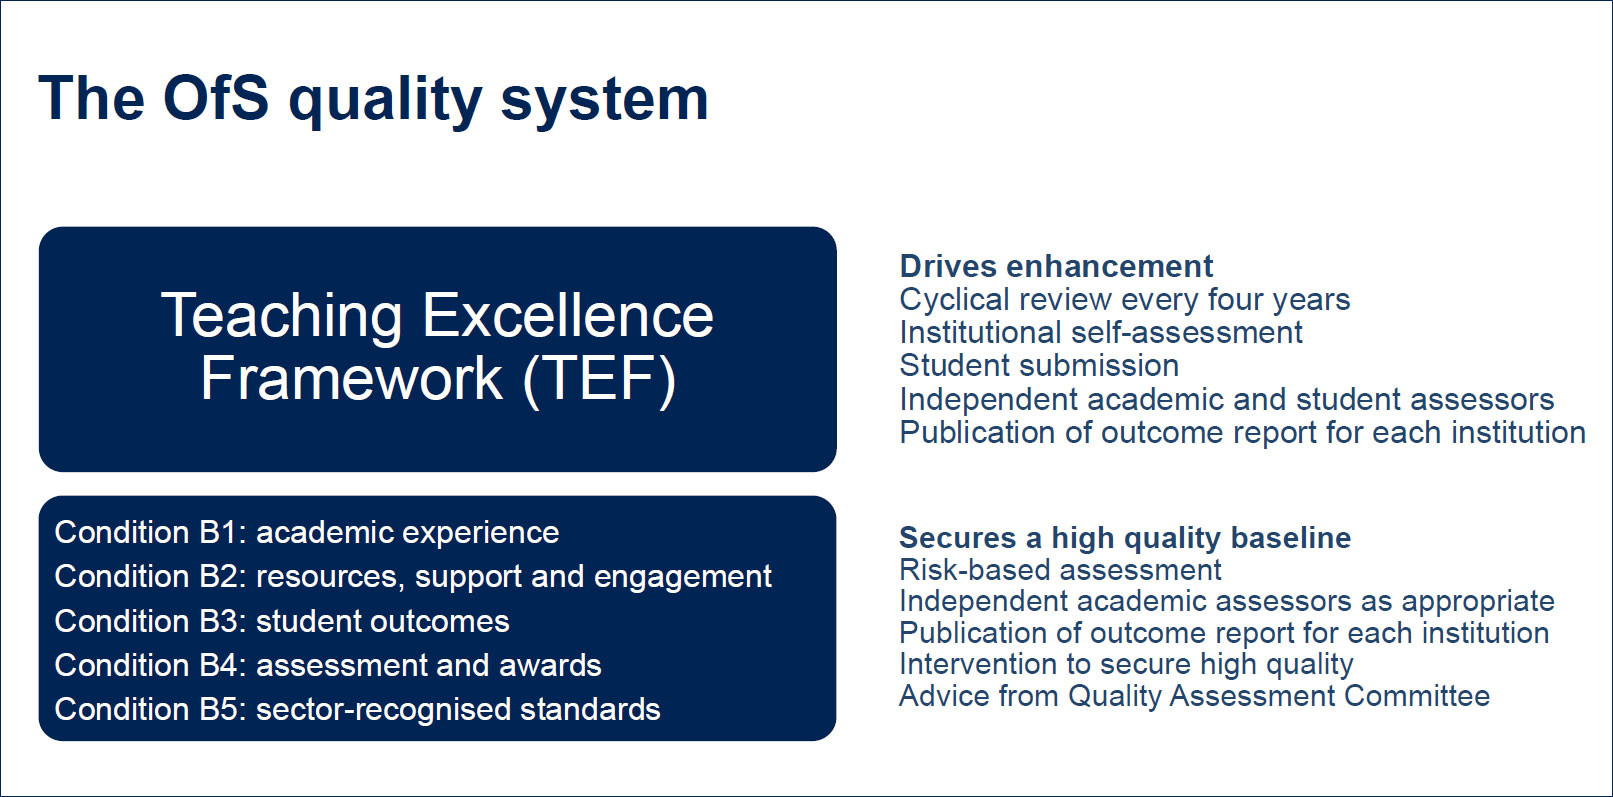 The OfS quality system: The Teaching Excellence Framework (TEF) - drives enhancement, cyclical review every four years, institutional self-assessment, student submission, independent academic and student assessors, publication of outcome report for each institution. B conditions (B1: academic experience, B2: resources, support and engagement, B3: student outcomes, B4: assessment and awards, B5: sector-recognised standards) - secures a high quality baseline, risk-based assessment, independent academic assessors as appropriate, publication of outcome report for each institution, intervention to secure high quality, advice from Quality Assessment Committee.